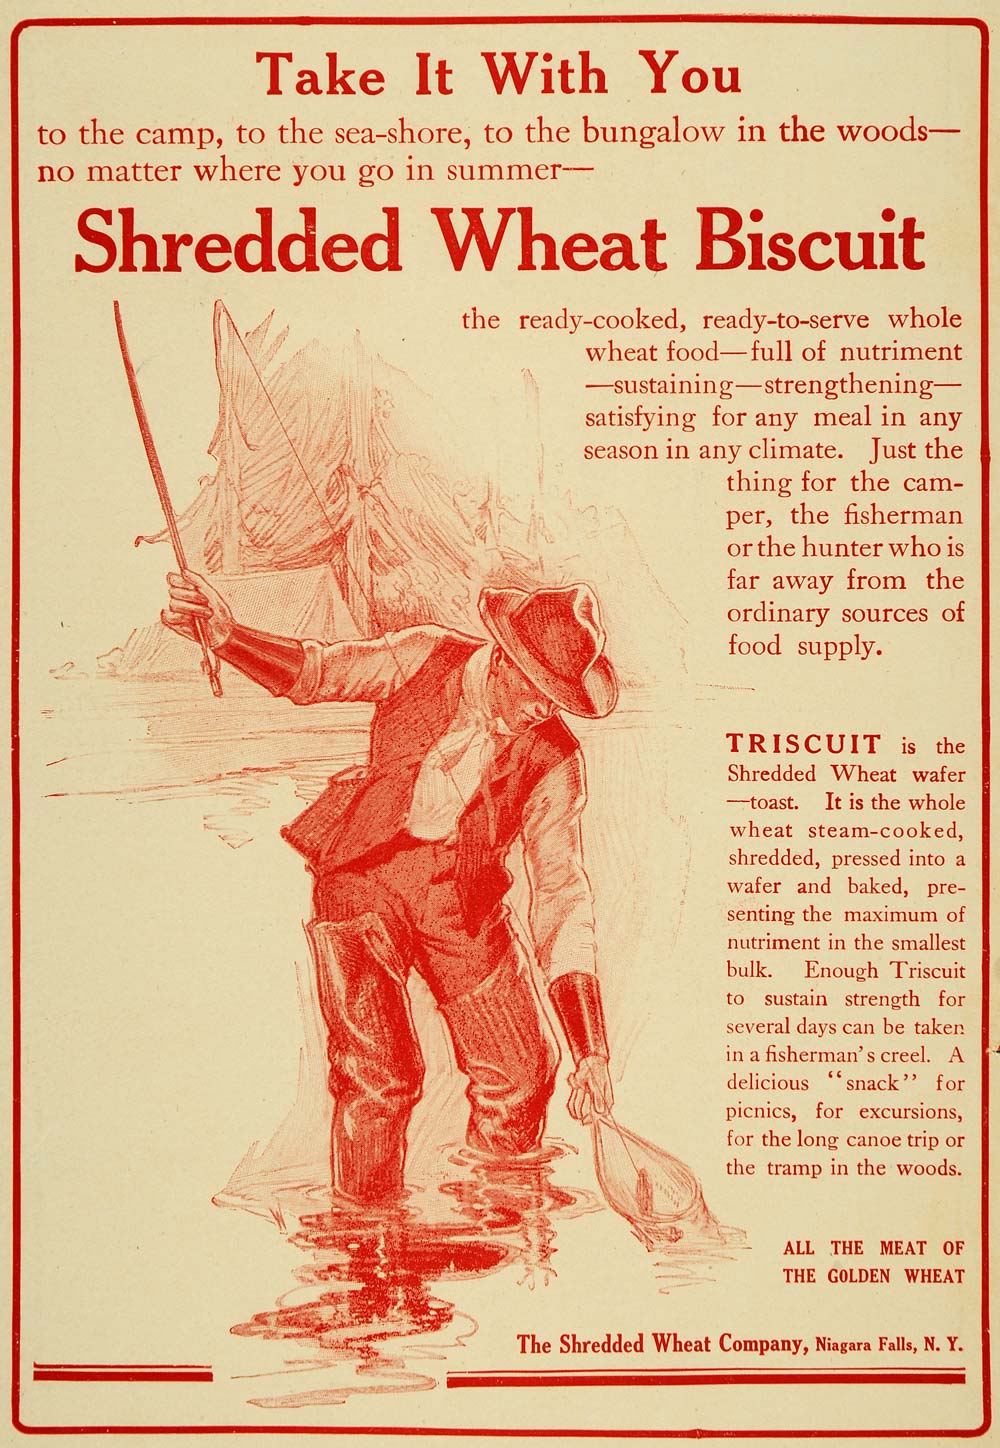 1910 Ad Shredded Wheat Co. Biscuit Triscuit Fishing - ORIGINAL ADVERTISING TIN4